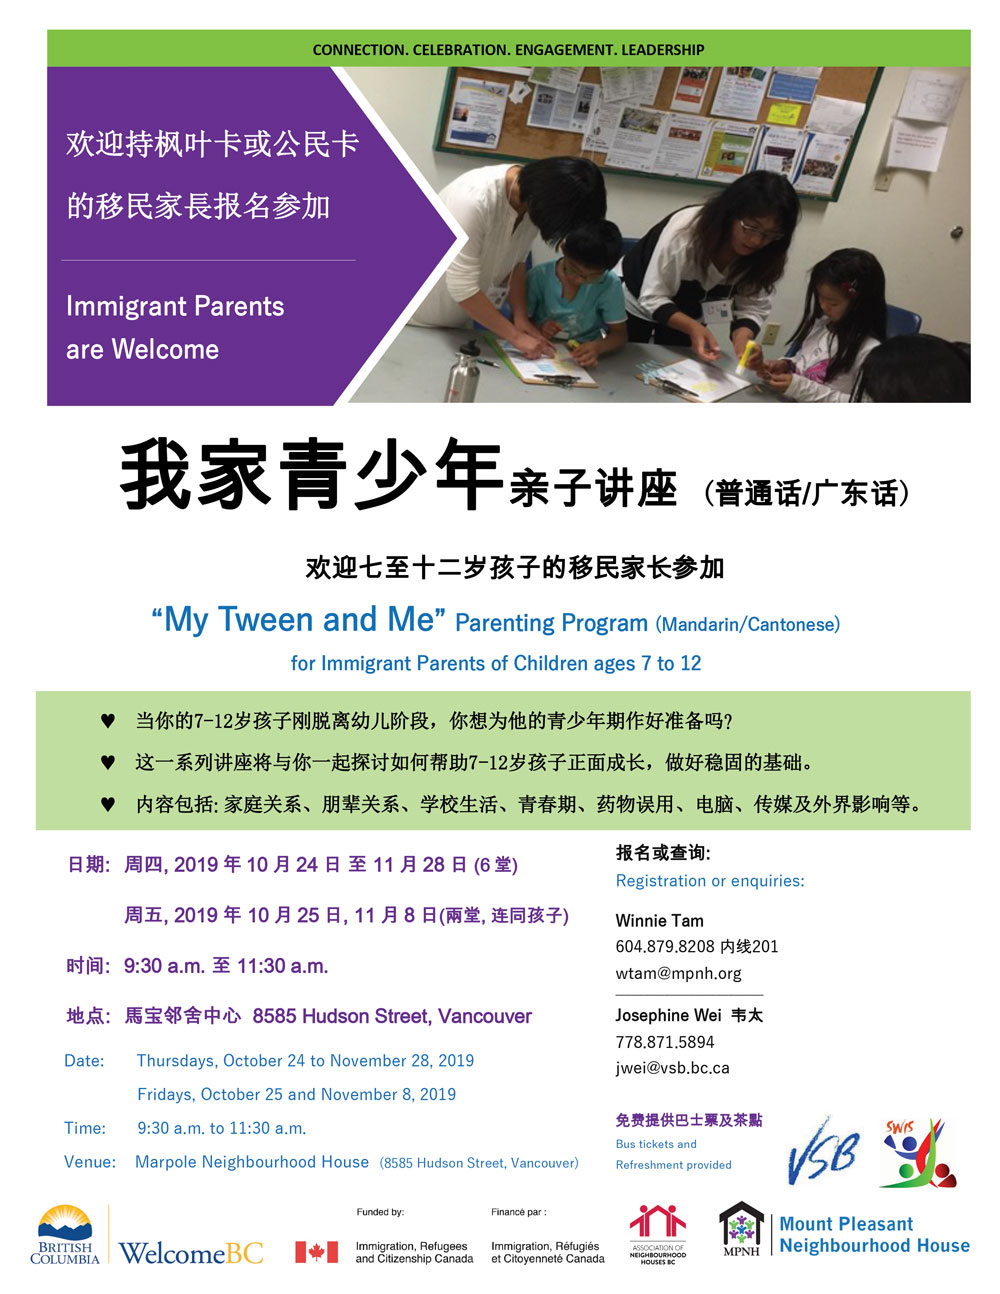 An image of the poster with program details, featuring a photo of two adults doing an activity around a table with young people.